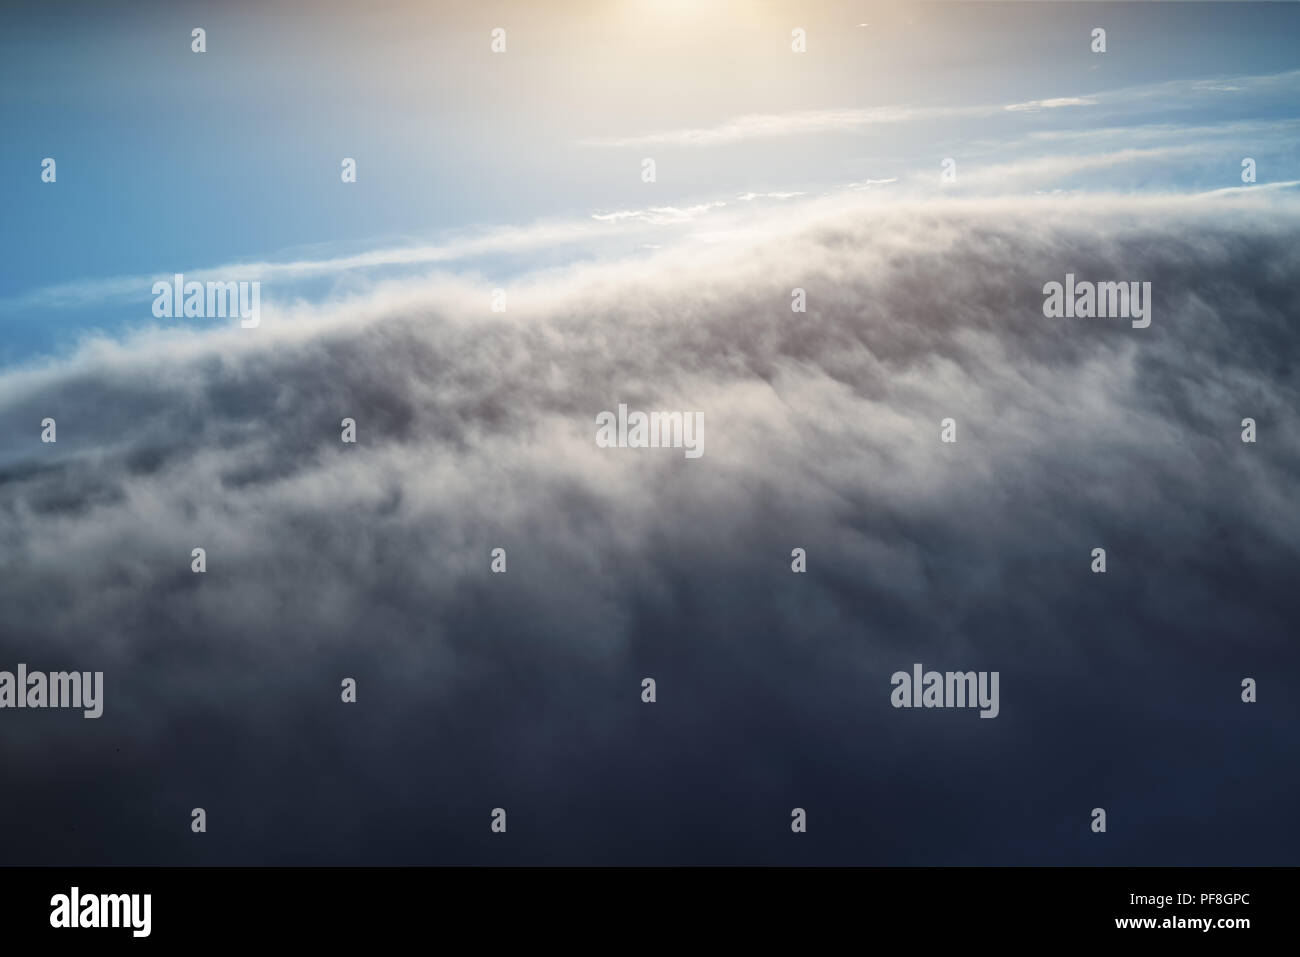 Aial view of clouds and blue skies above the earth. Stock Photo